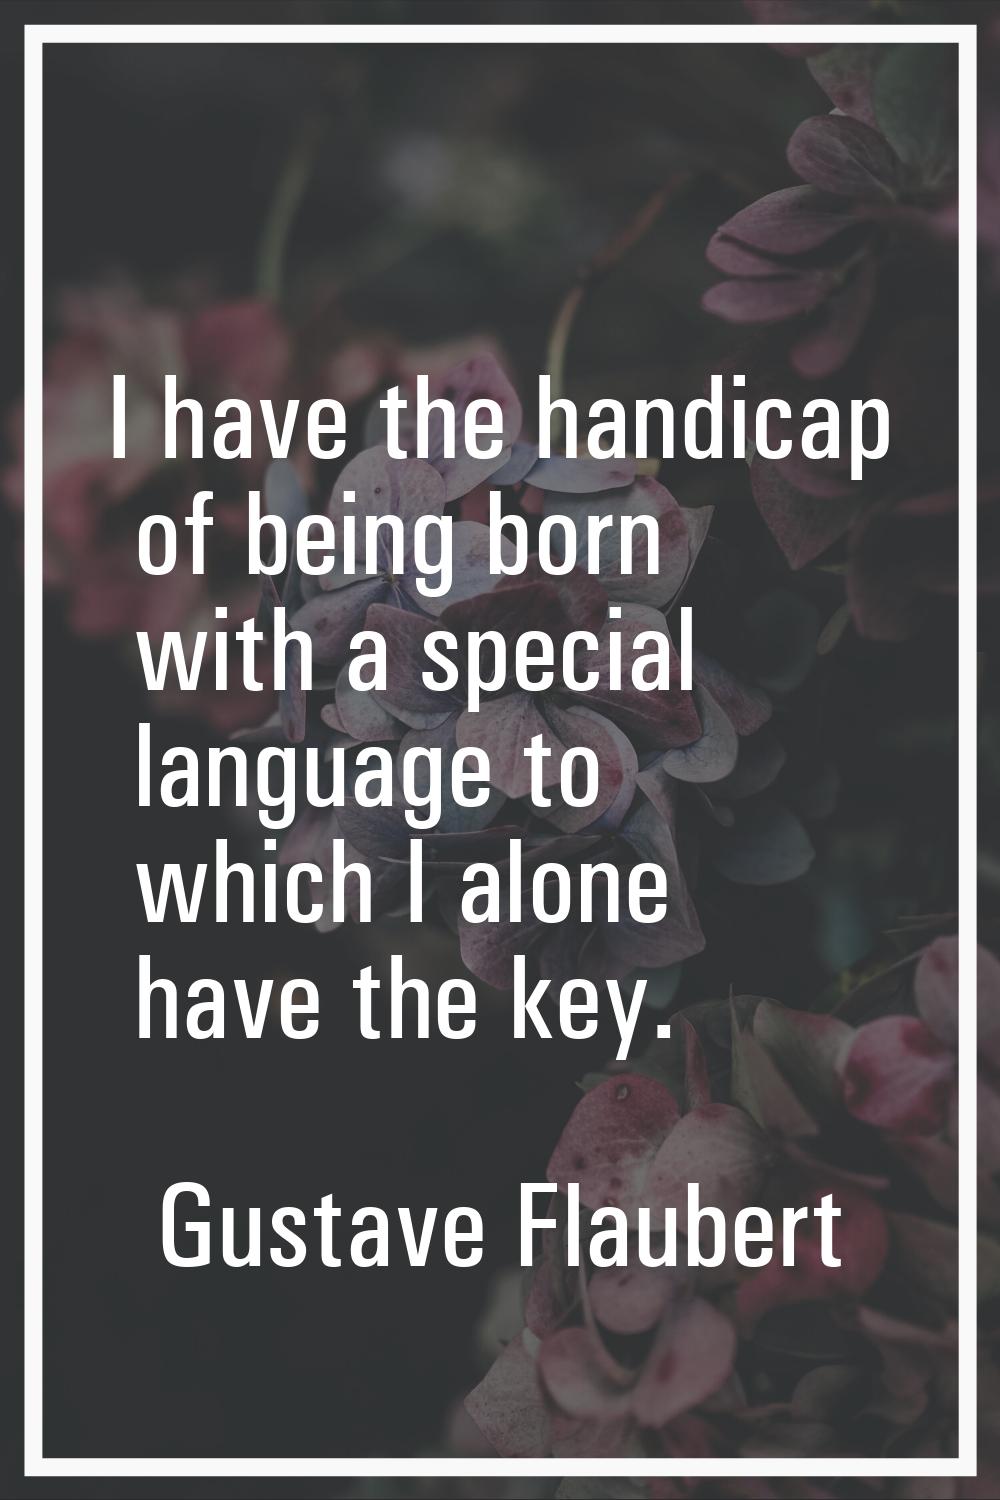 I have the handicap of being born with a special language to which I alone have the key.